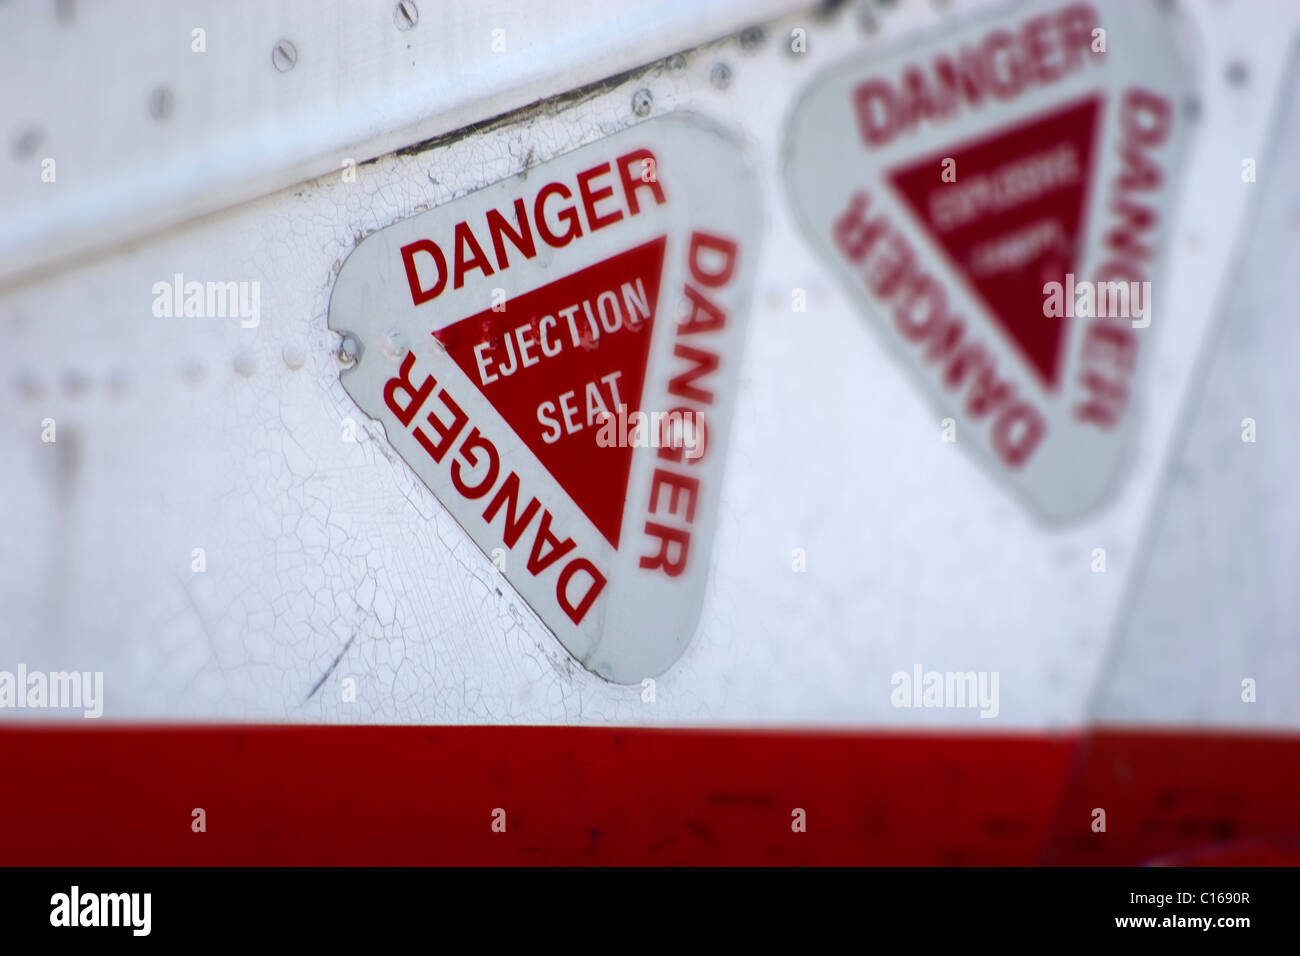 Danger ejection seat signs stickers warnings triangles battered worn damaged red white aircraft jet provest Stock Photo